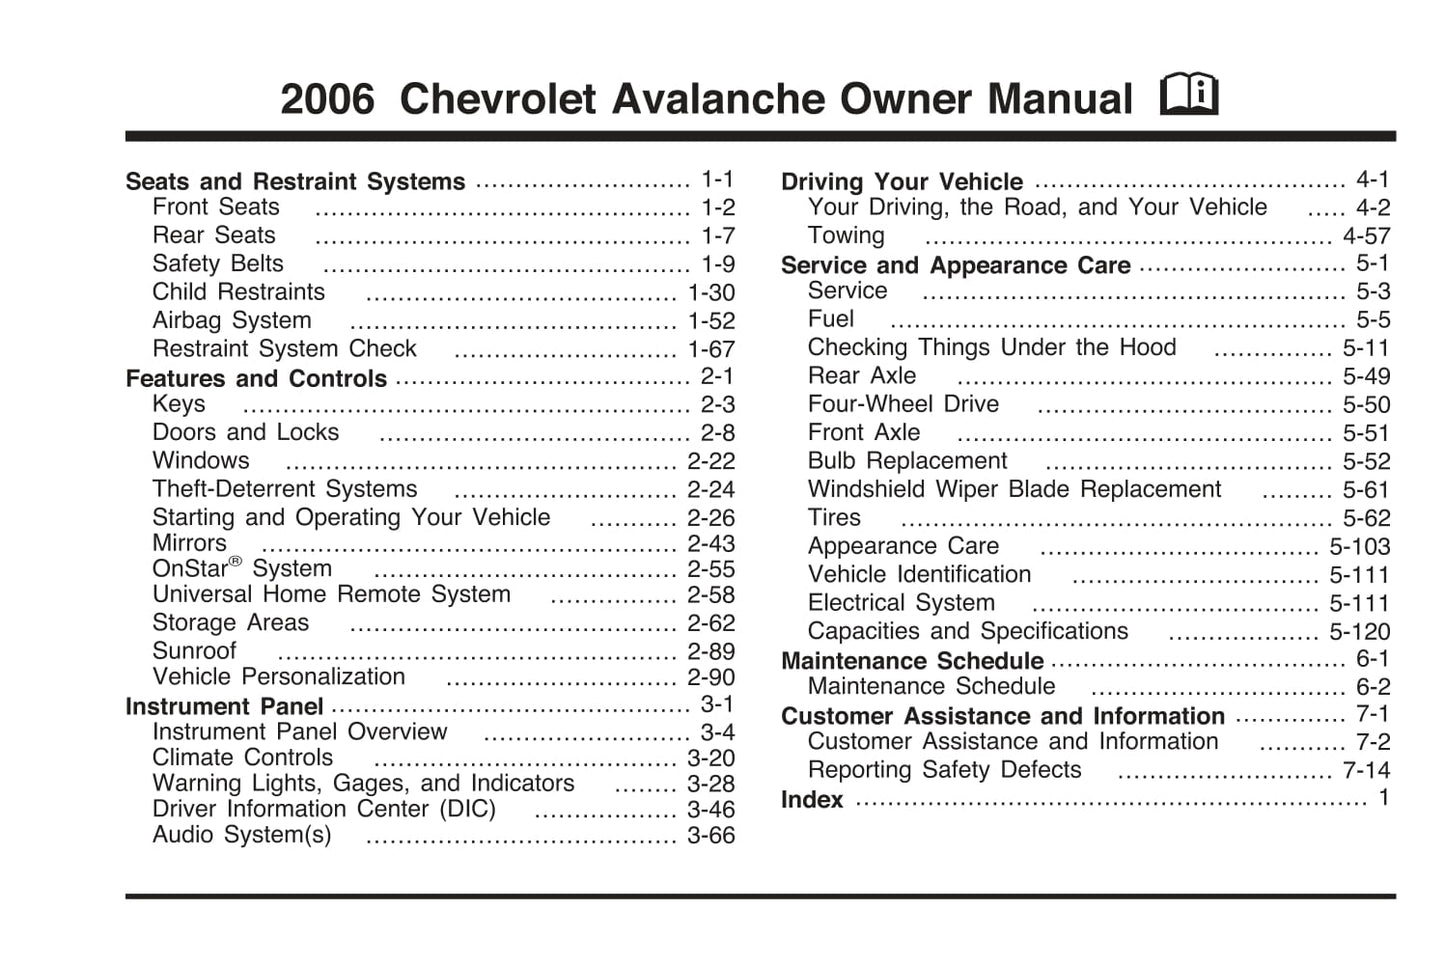 2006 Chevrolet Avalanche Owner's Manual | English